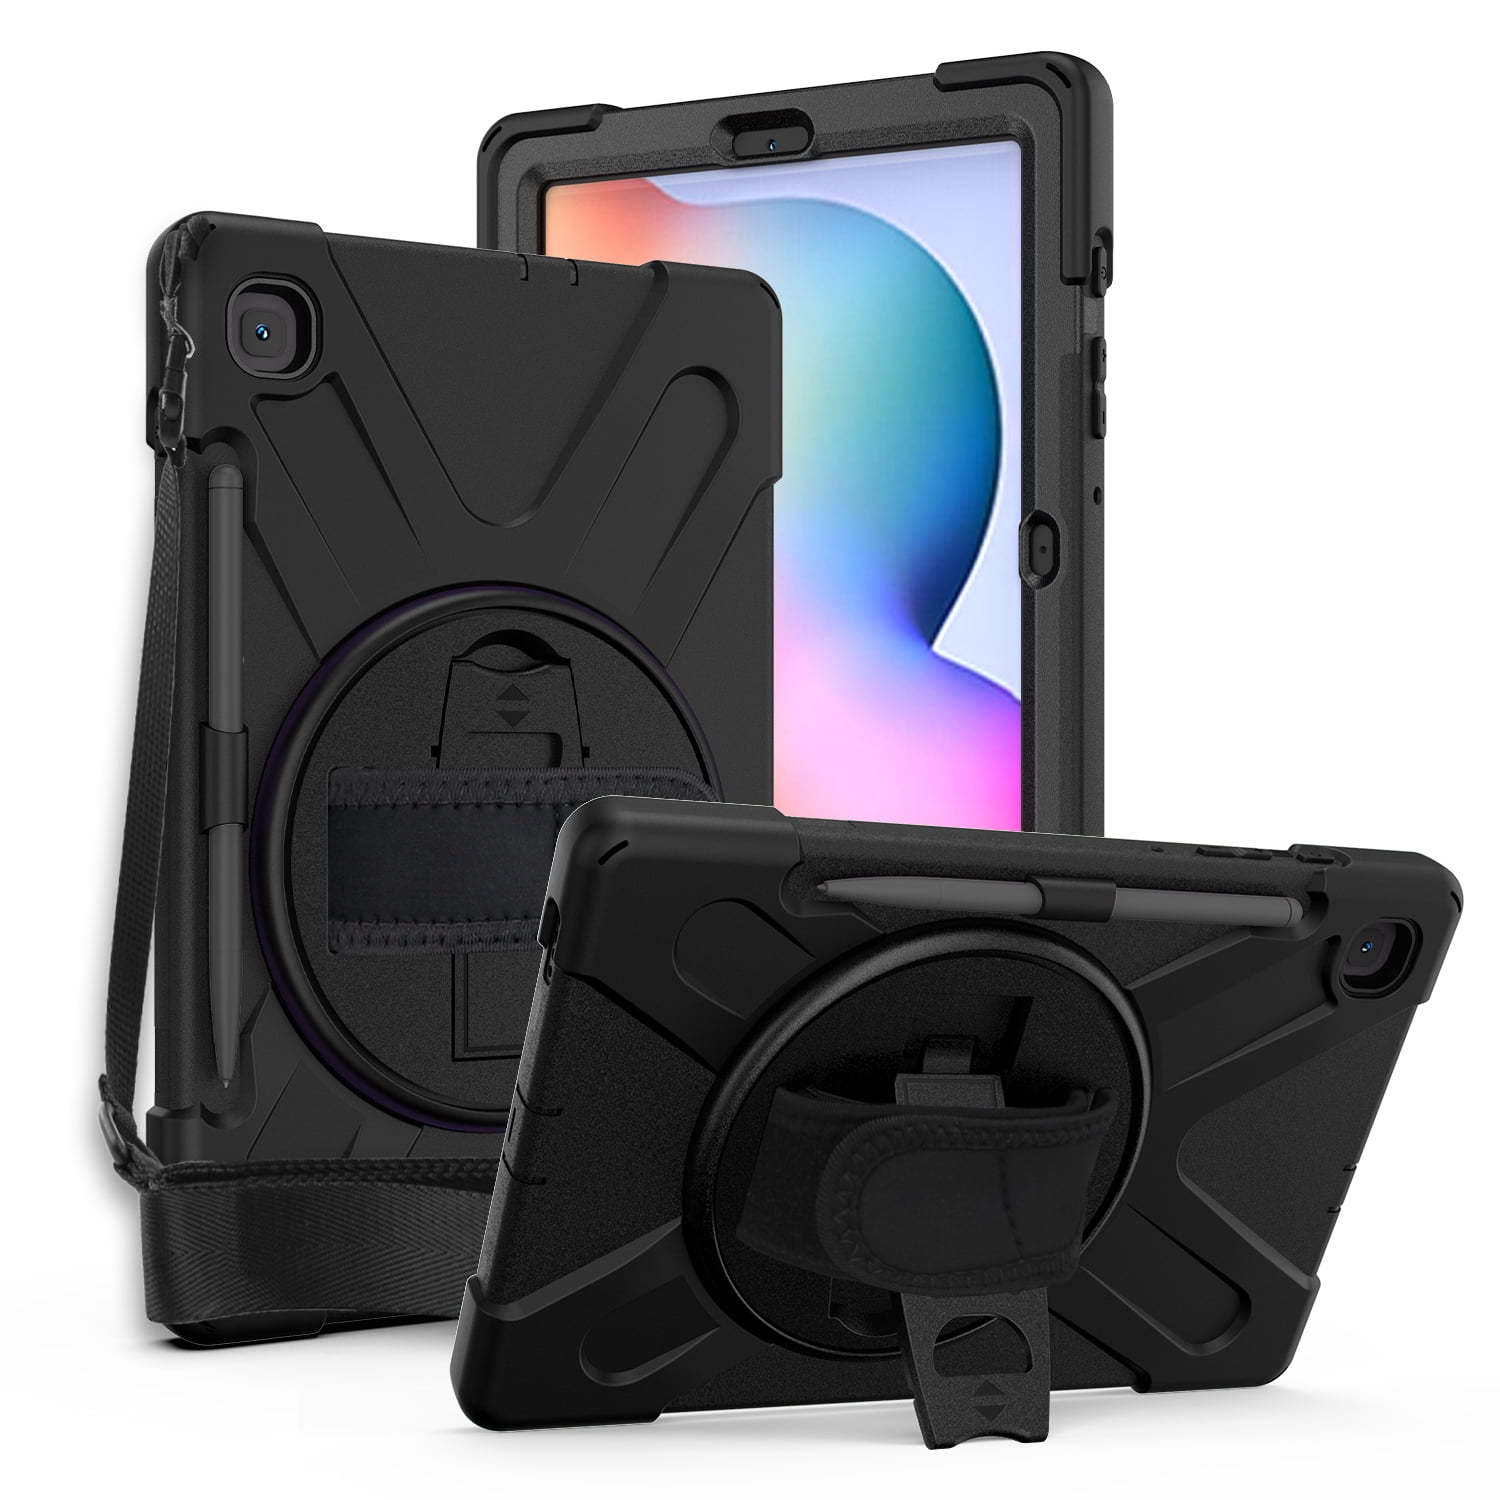 Heavy Duty Rugged Stand Tablet Shockproof Case Cover For Samsung Galaxy Tab A/ E 